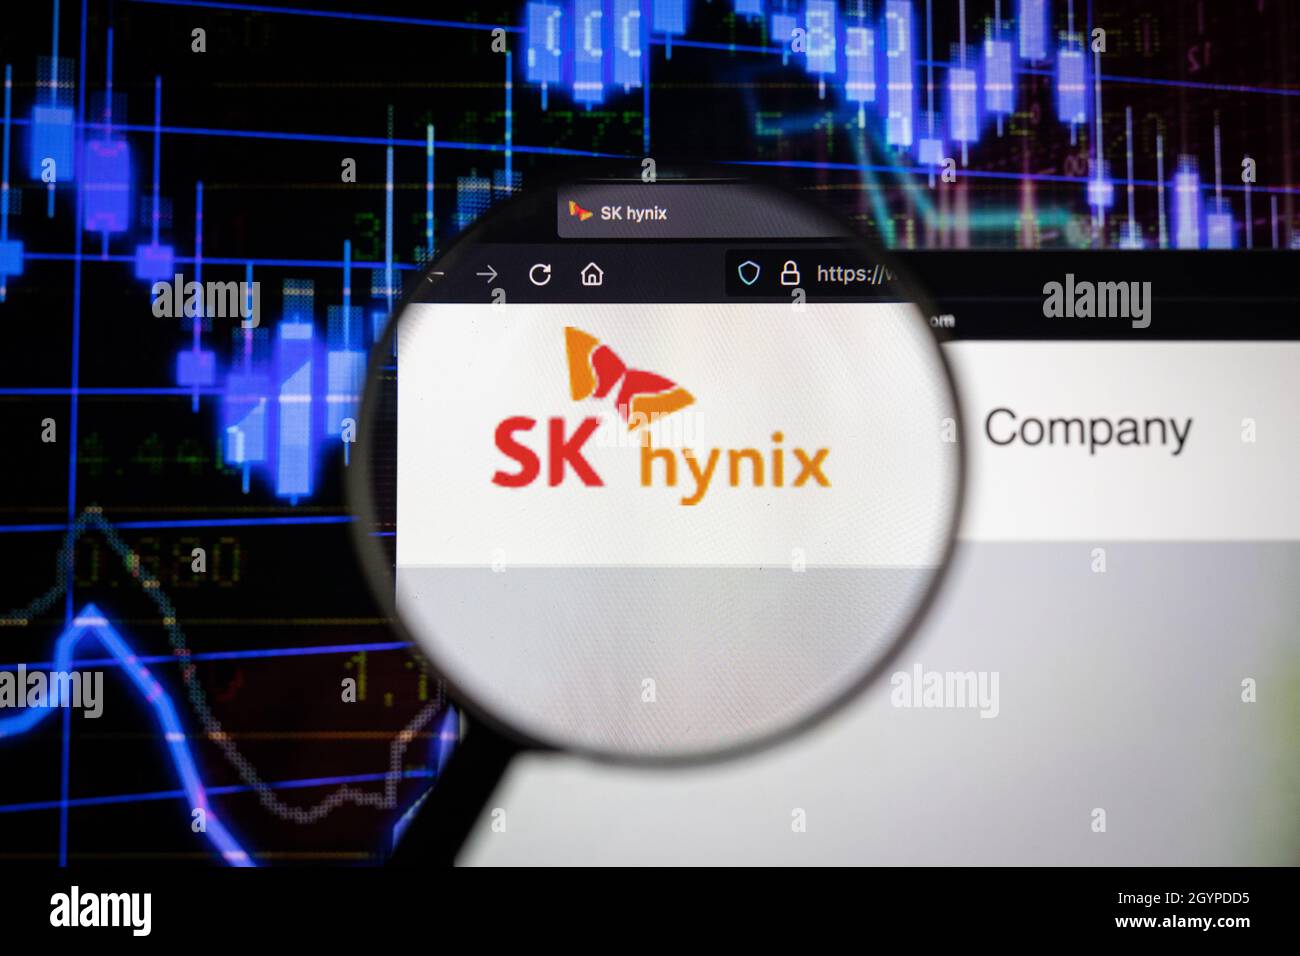 SK Hynix company logo on a website with blurry stock market developments in the background, seen on a computer screen through a magnifying glass Stock Photo